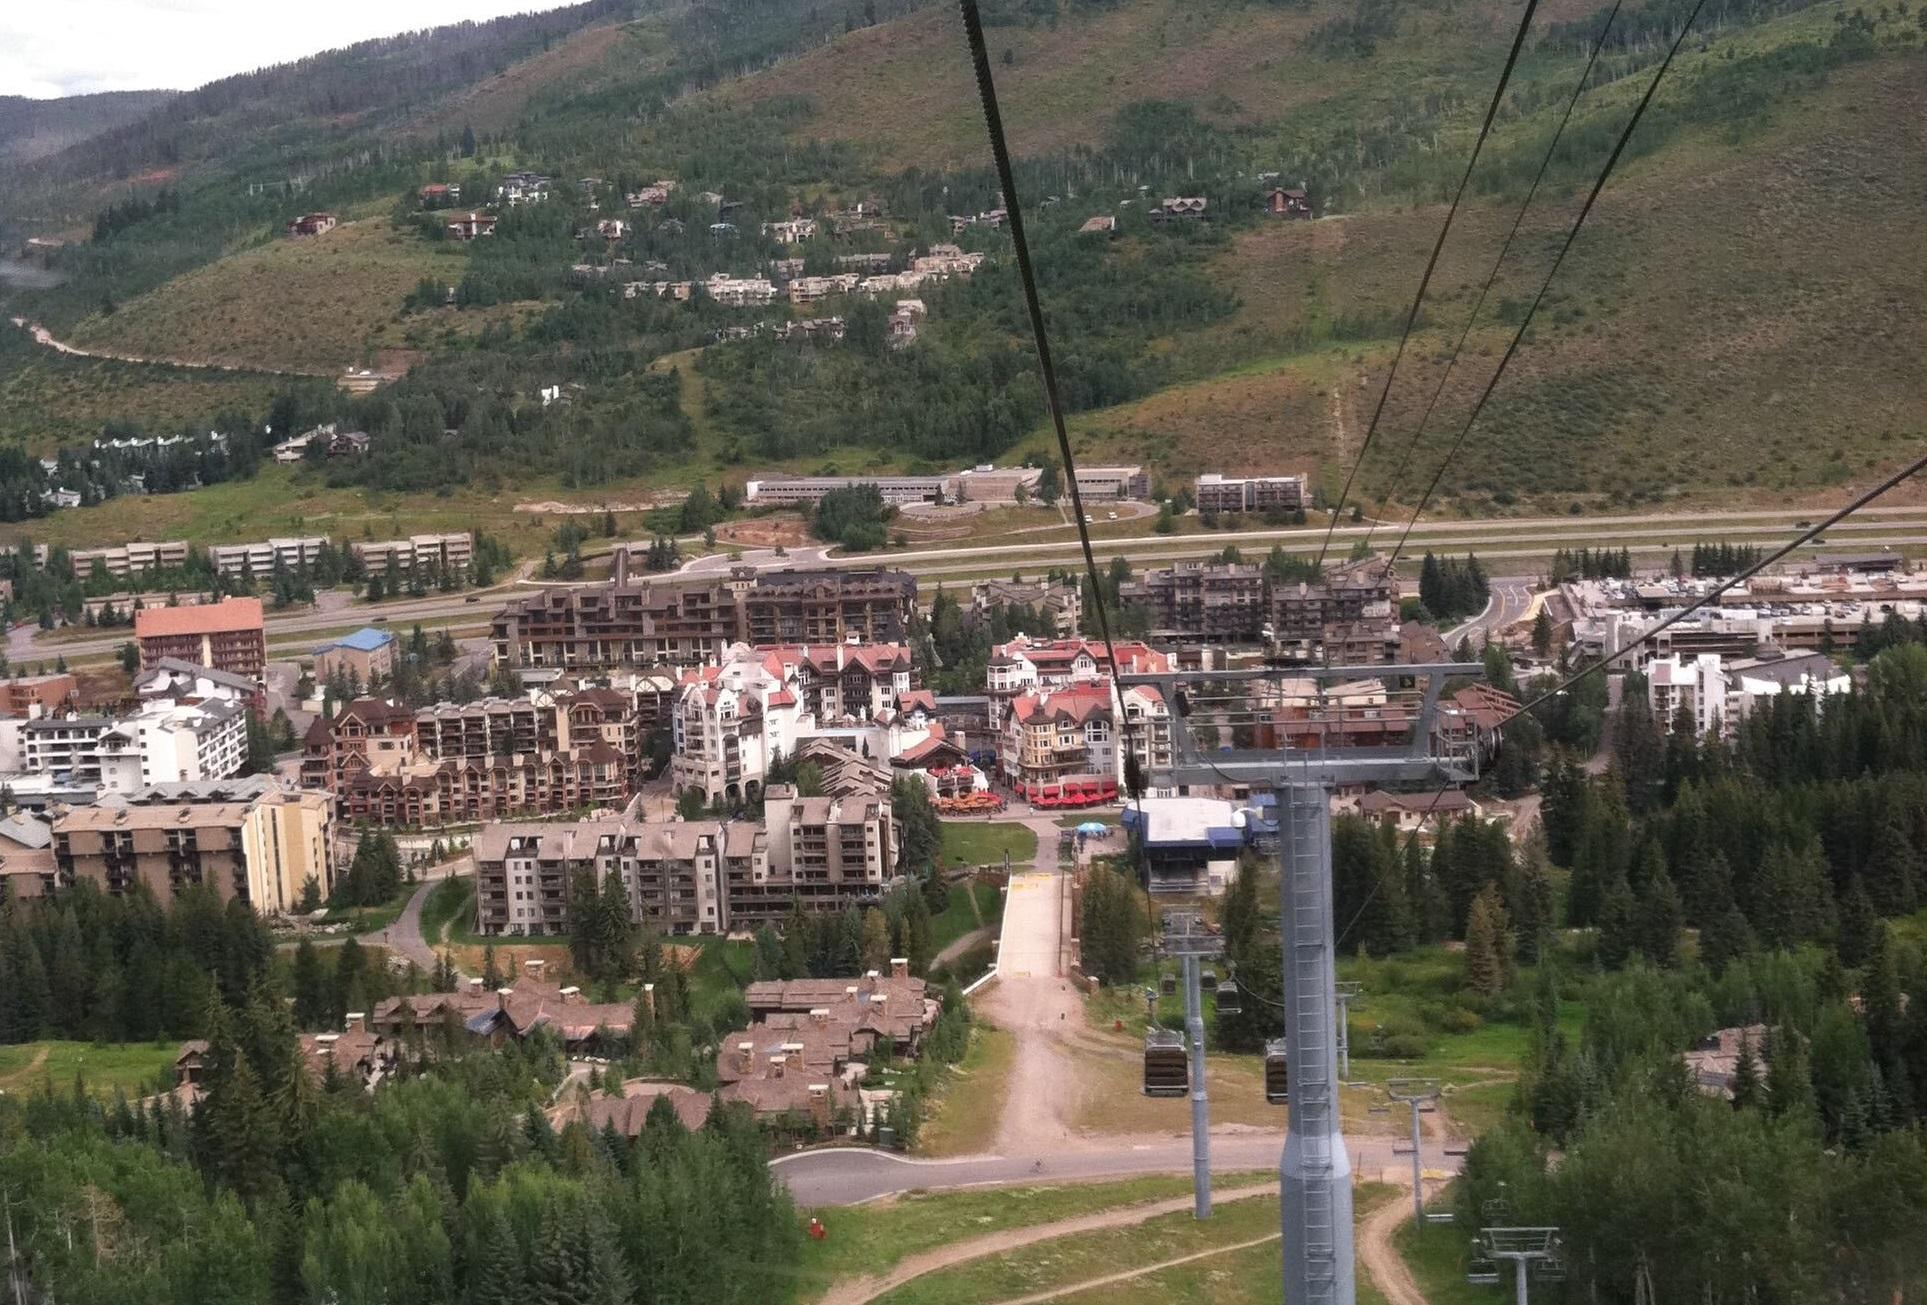 The Vail Valley